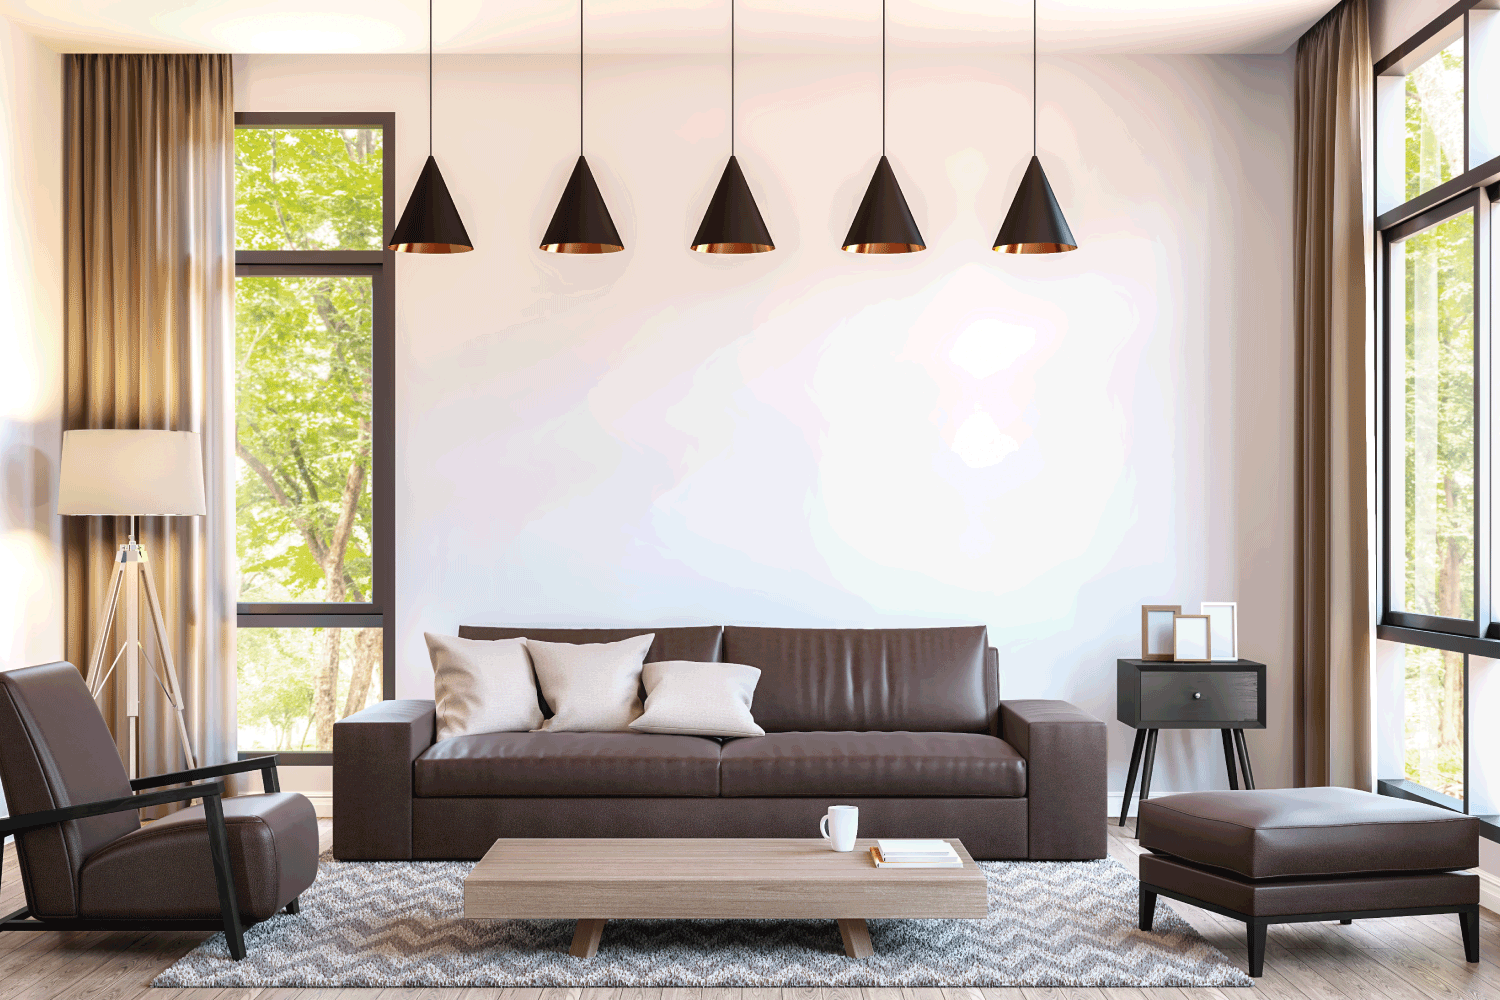 Modern living room decorate with brown leather furniture.There are large window overlooking to nature and forest